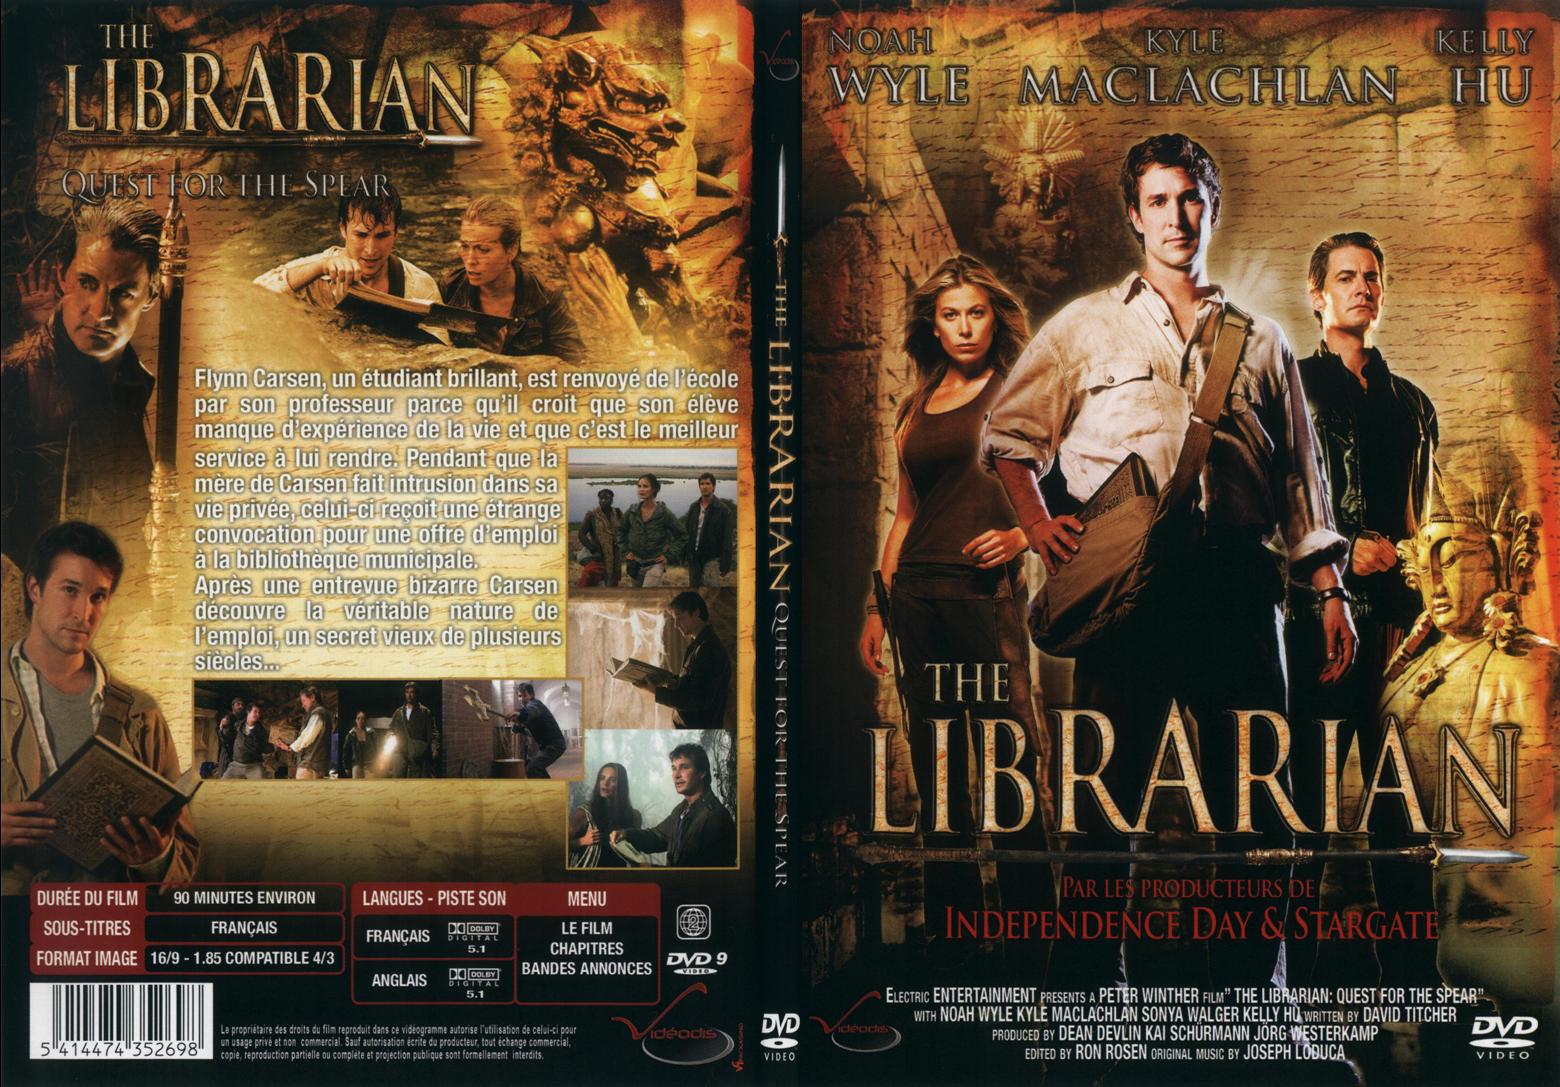 Jaquette DVD The librarian - SLIM